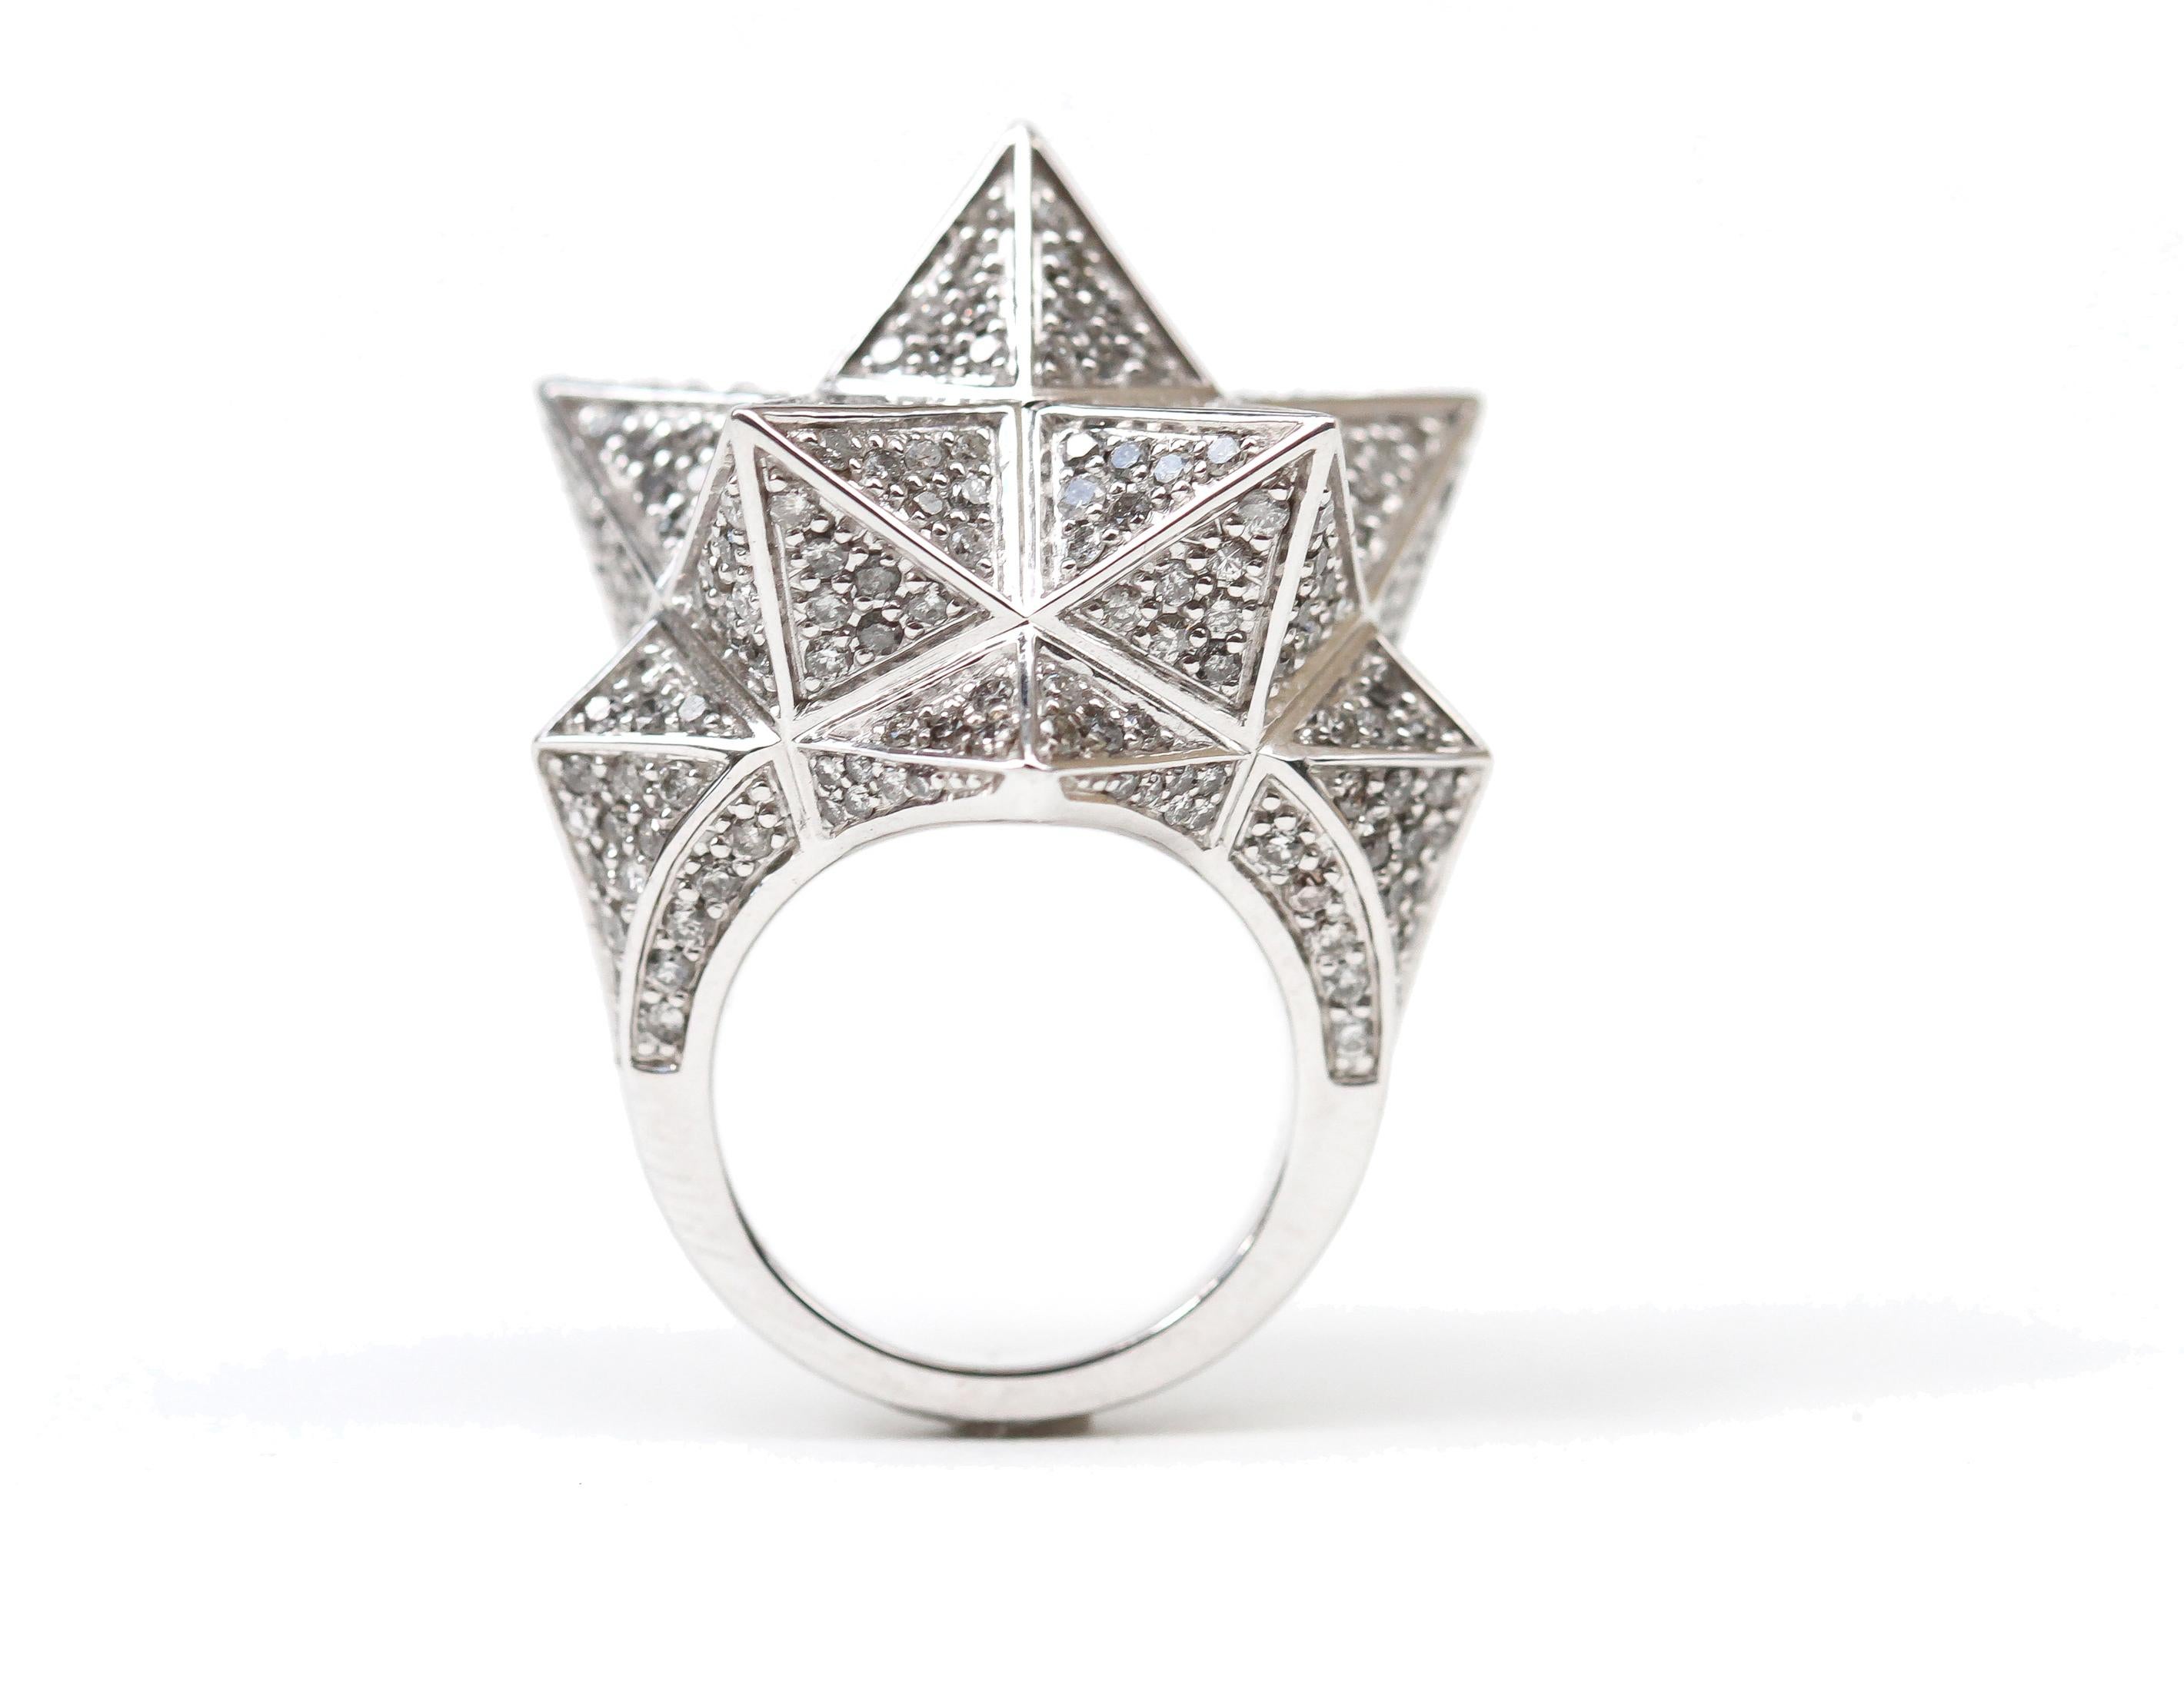 Inspired by sacred geometries, namely the Star Tetrahedron, this John Brevard statement ring is created in 18K white gold with 352 pavé round gray diamonds at 1.0 -1.5 mm each (4.8 carats total). The star tetrahedron is the intersection of two